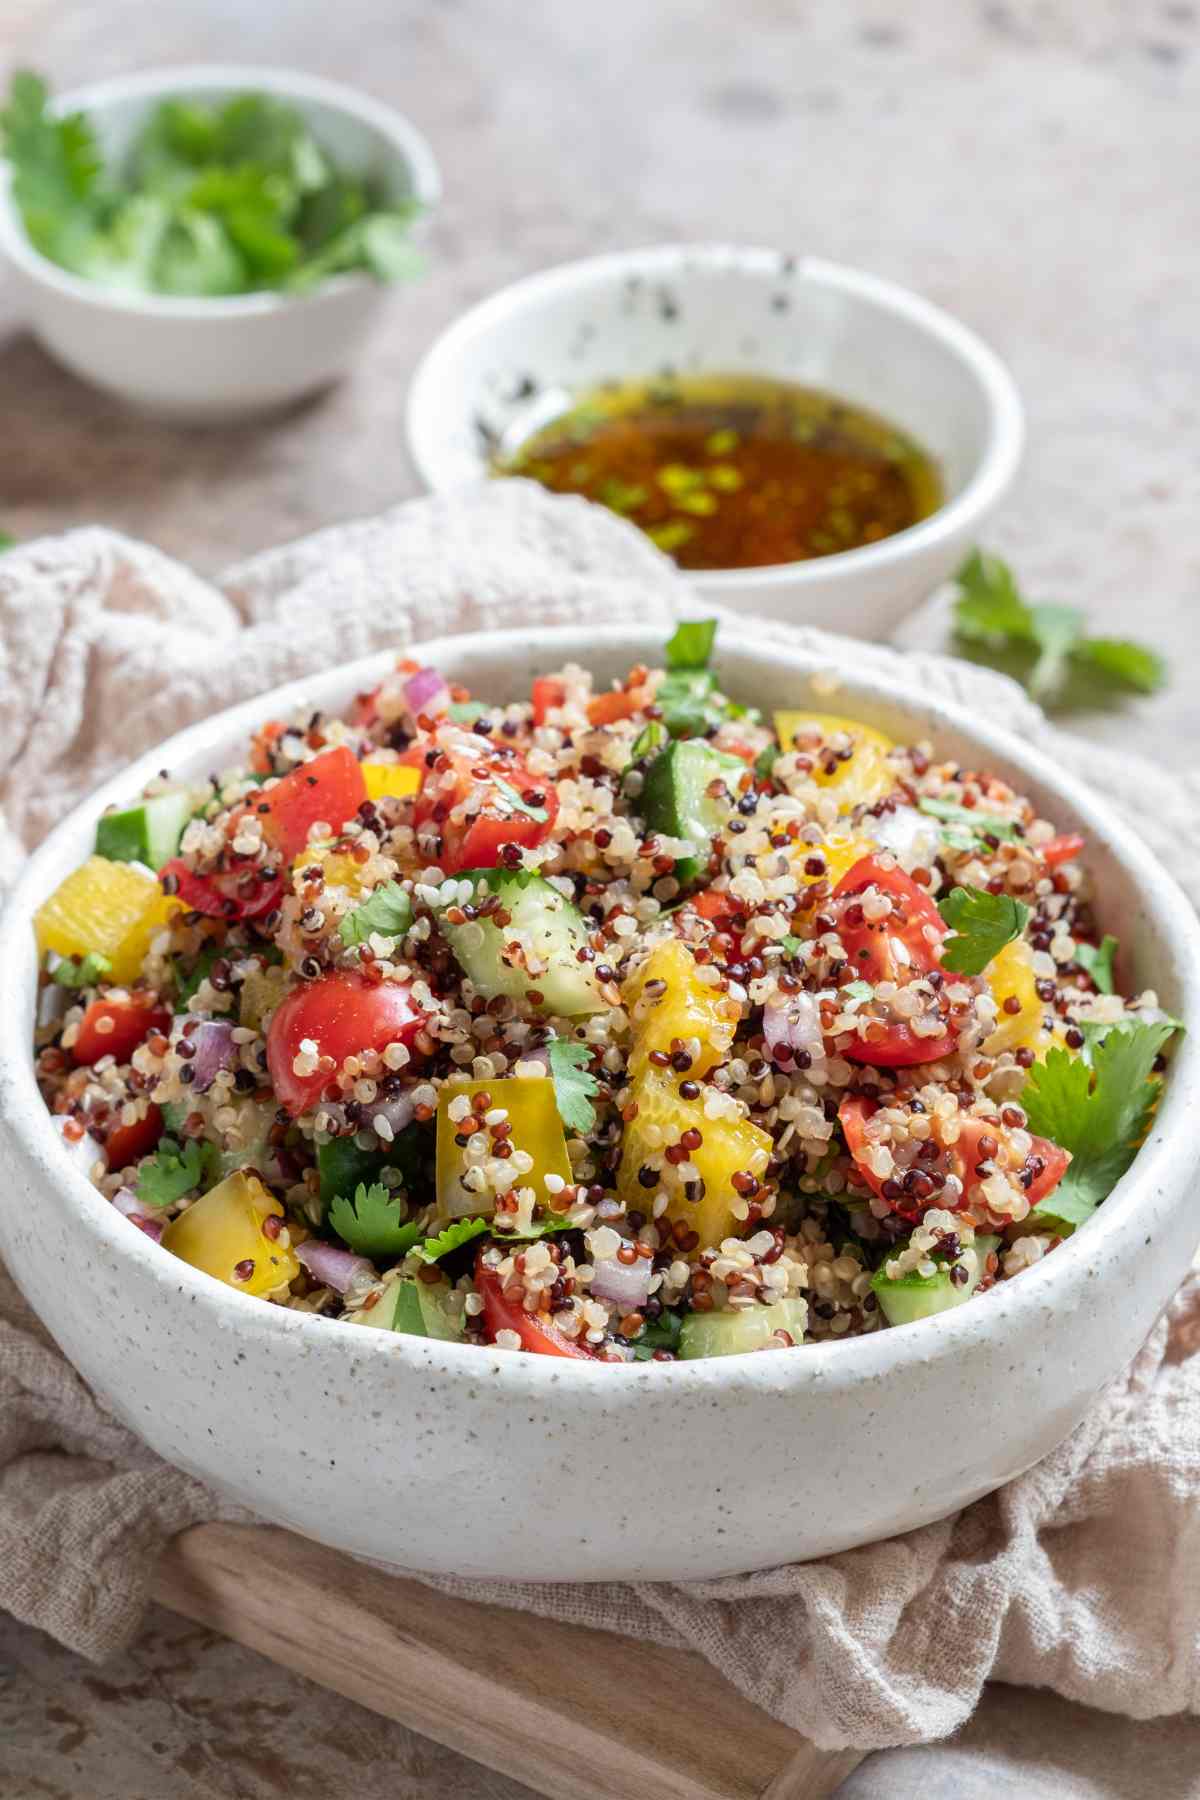 Tabbouleh is a traditional Middle Eastern salad that makes a delicious vegetarian entree or a healthy side dish. It’s a delicious combination of protein-packed quinoa, flavorful herbs and fresh vegetables. The result is a light and refreshing summer salad that keeps you full for hours past lunchtime.